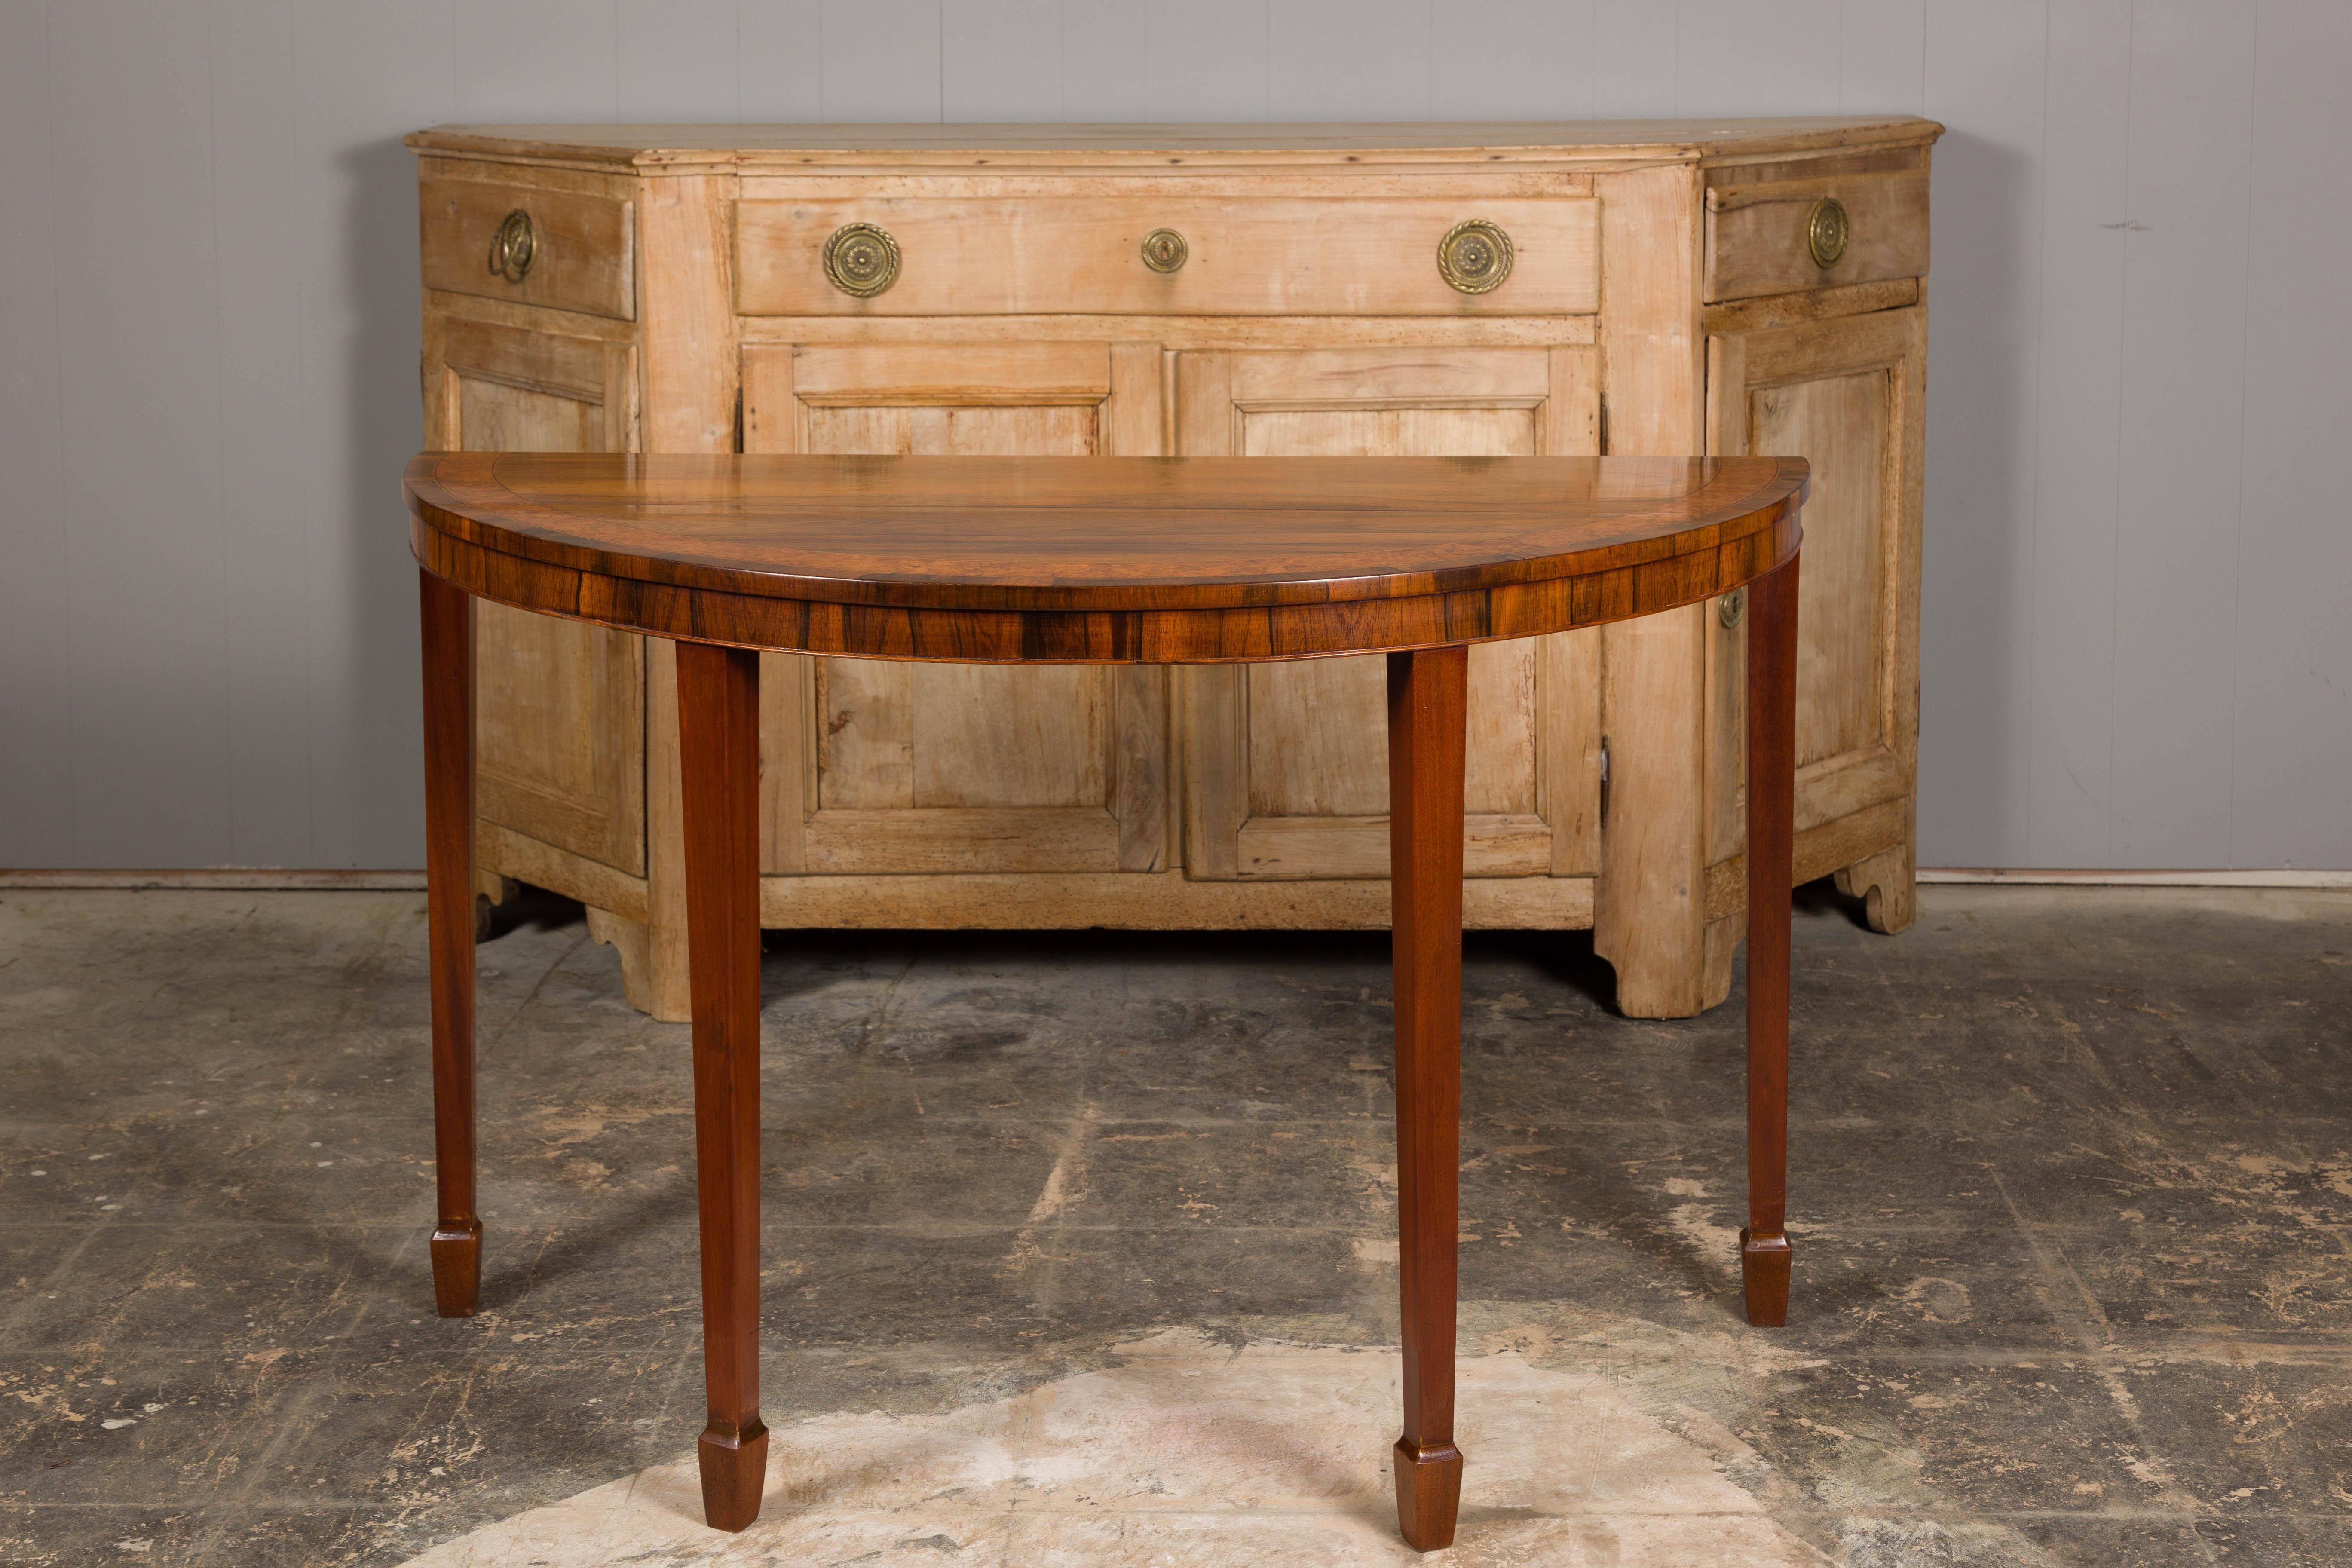 English 19th Century Mahogany Demilune Console Tables with Tapered Legs, a Pair For Sale 1